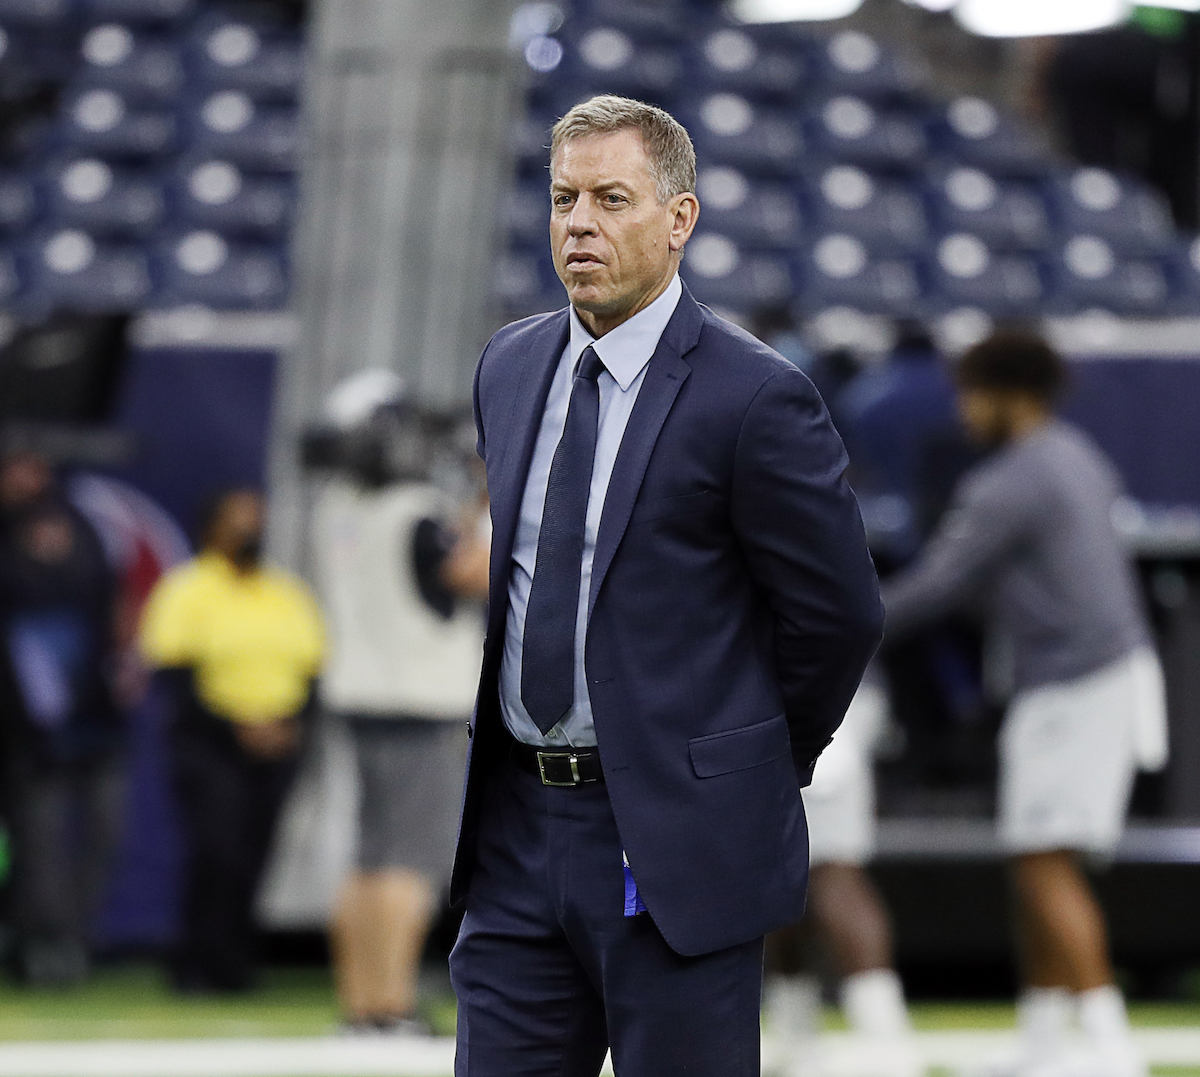 Troy Aikman Alludes to His $7.5 Million Fox Paycheck in Response to Thoughts on a Dallas Cowboys Front Office Job